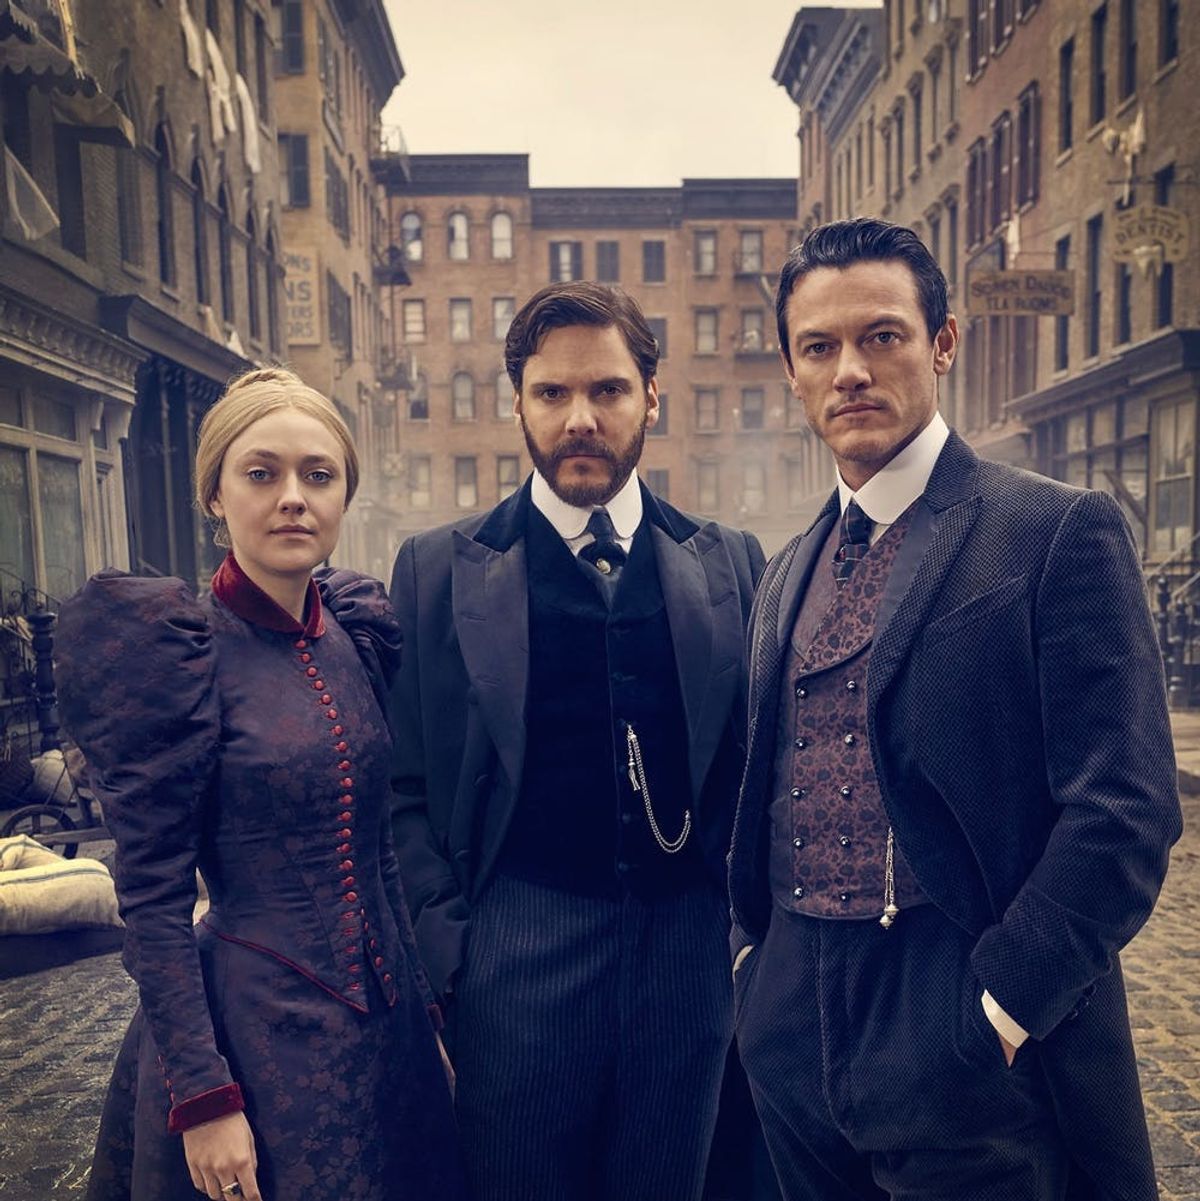 ‘The Alienist’: 5 Things to Know About TNT’s New Crime Drama Starring Dakota Fanning